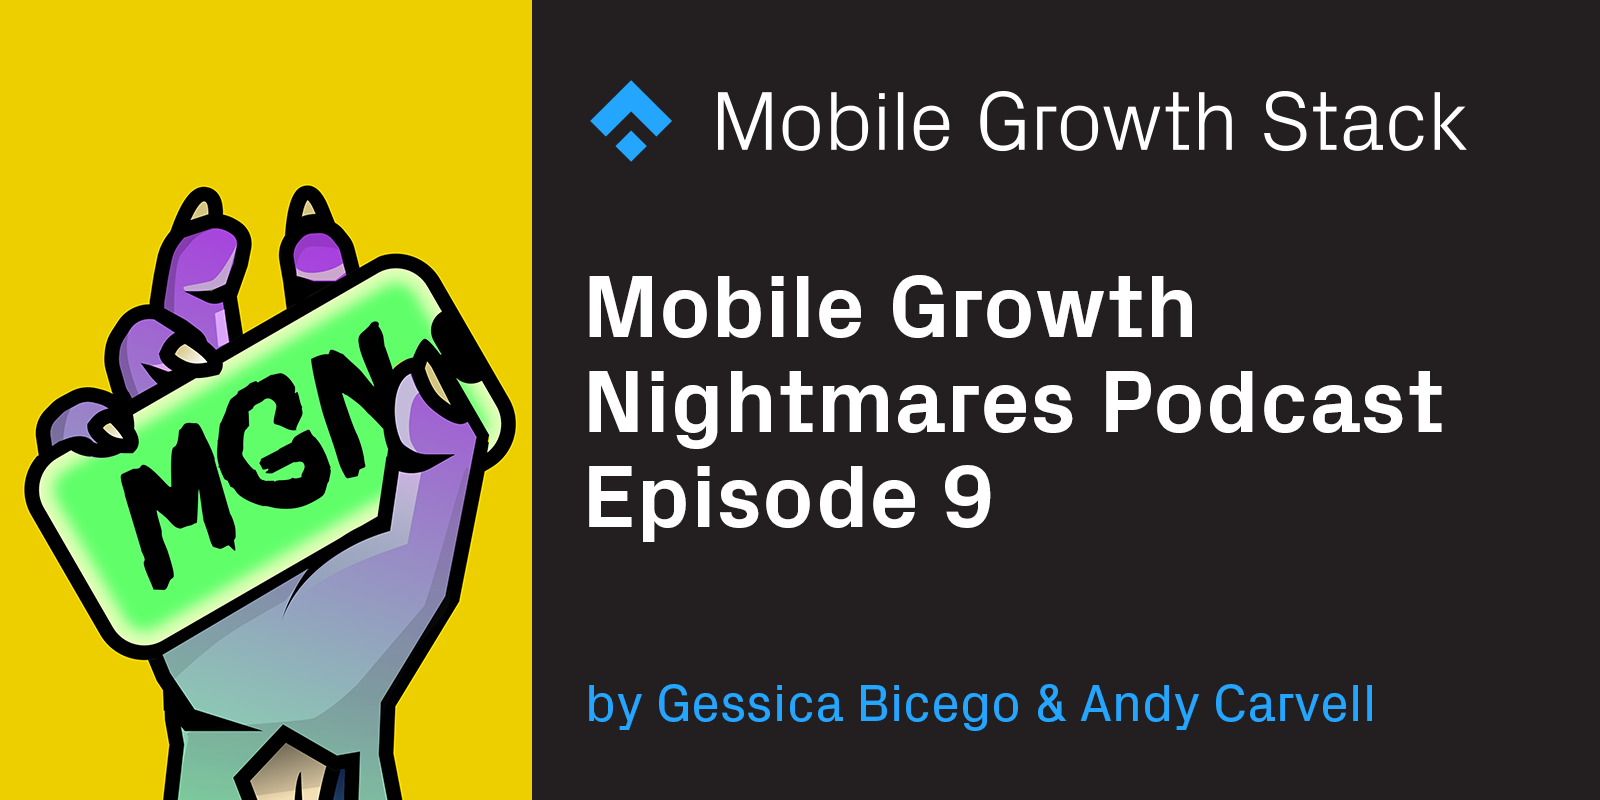 Mobile Growth Nightmares Episode 9 — Recorded at AGS 2019 with Ada Dubrawska from the Messaging team at Clue & Catherine Bostian, CRM Manager at Delivery Hero